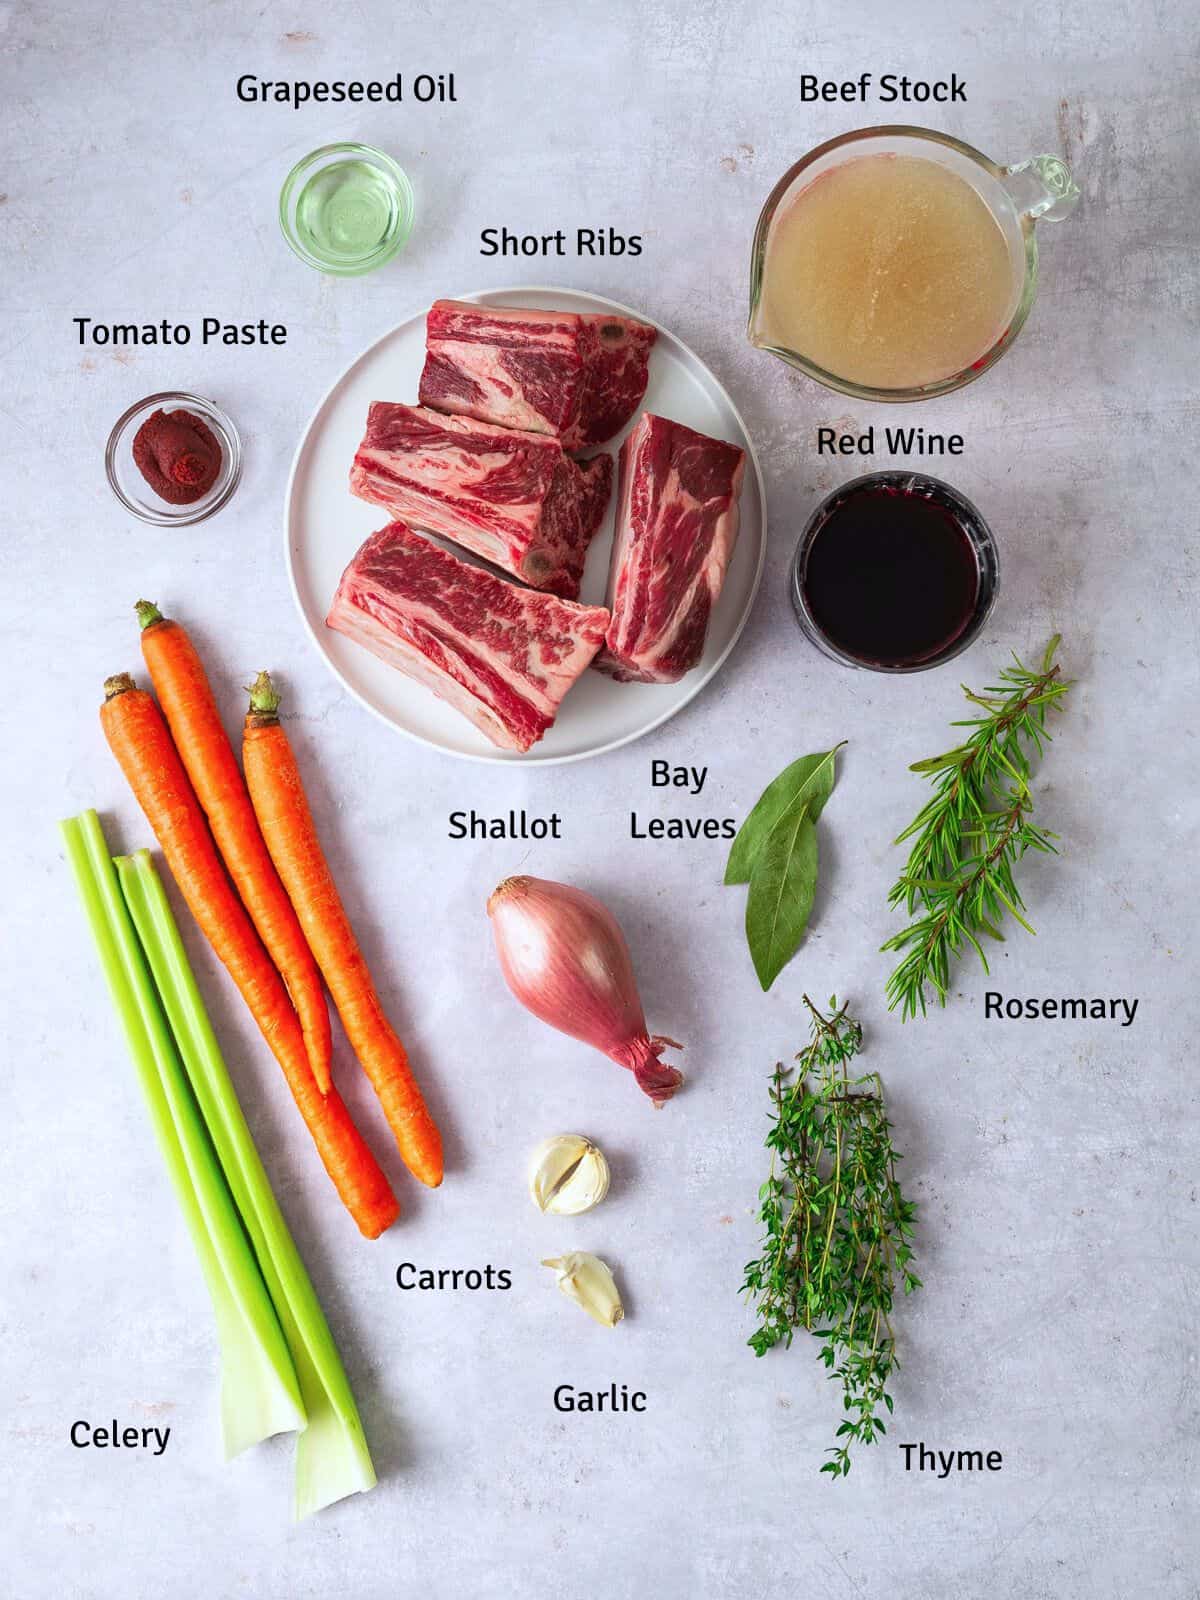 Ingredients for red wine braised short ribs, including carrot, celery shallot, garlic and fresh herbs.